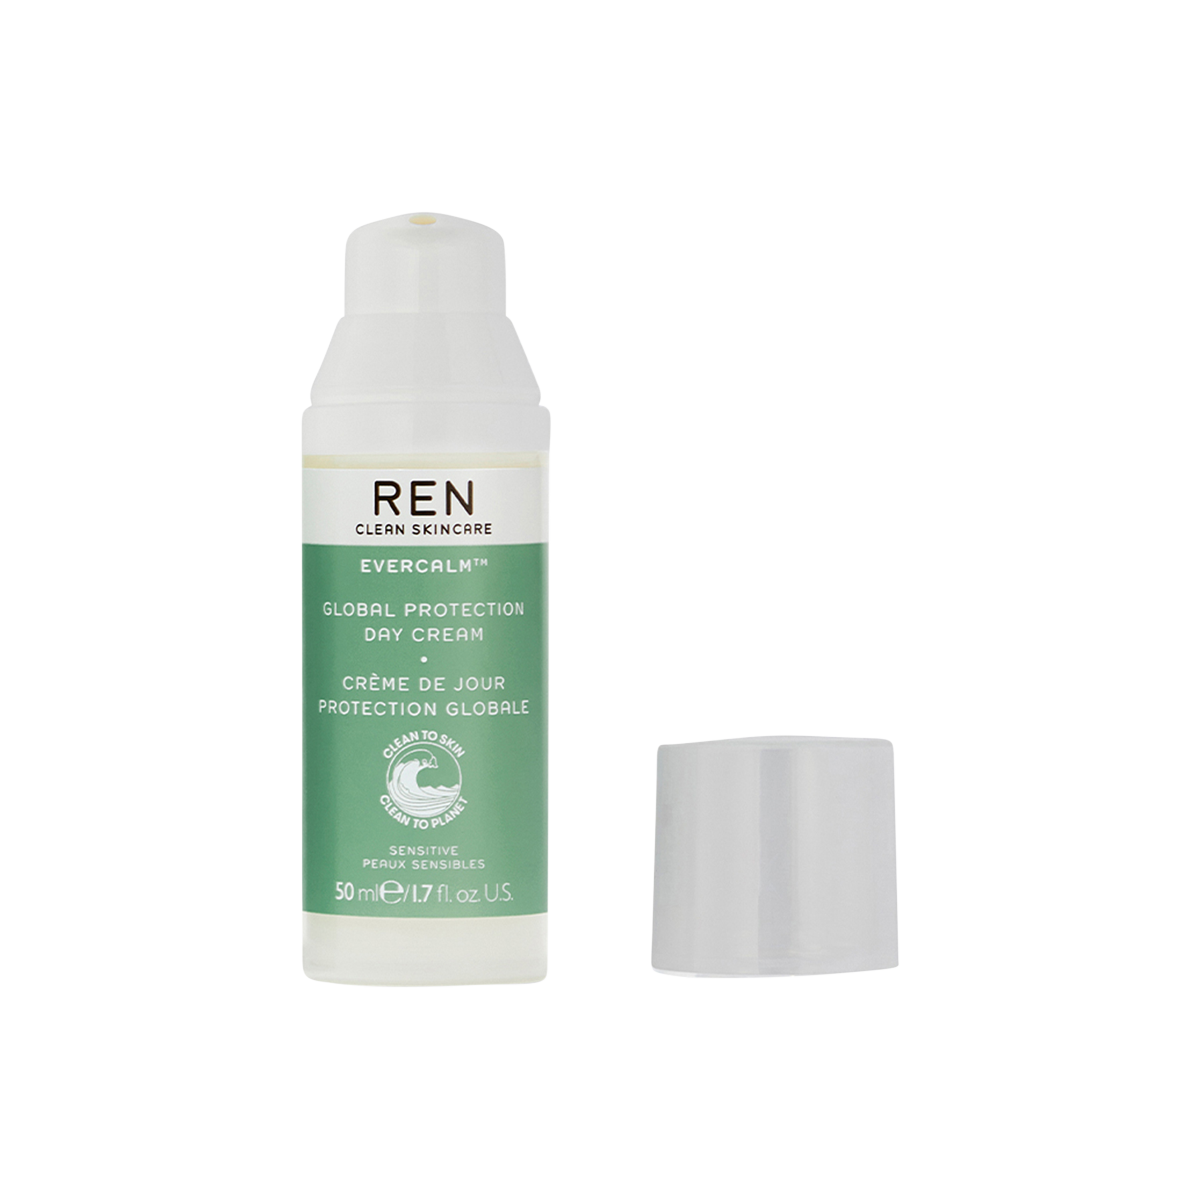 Ren Clean Skincare - Evercalm Global Protection Day Cream